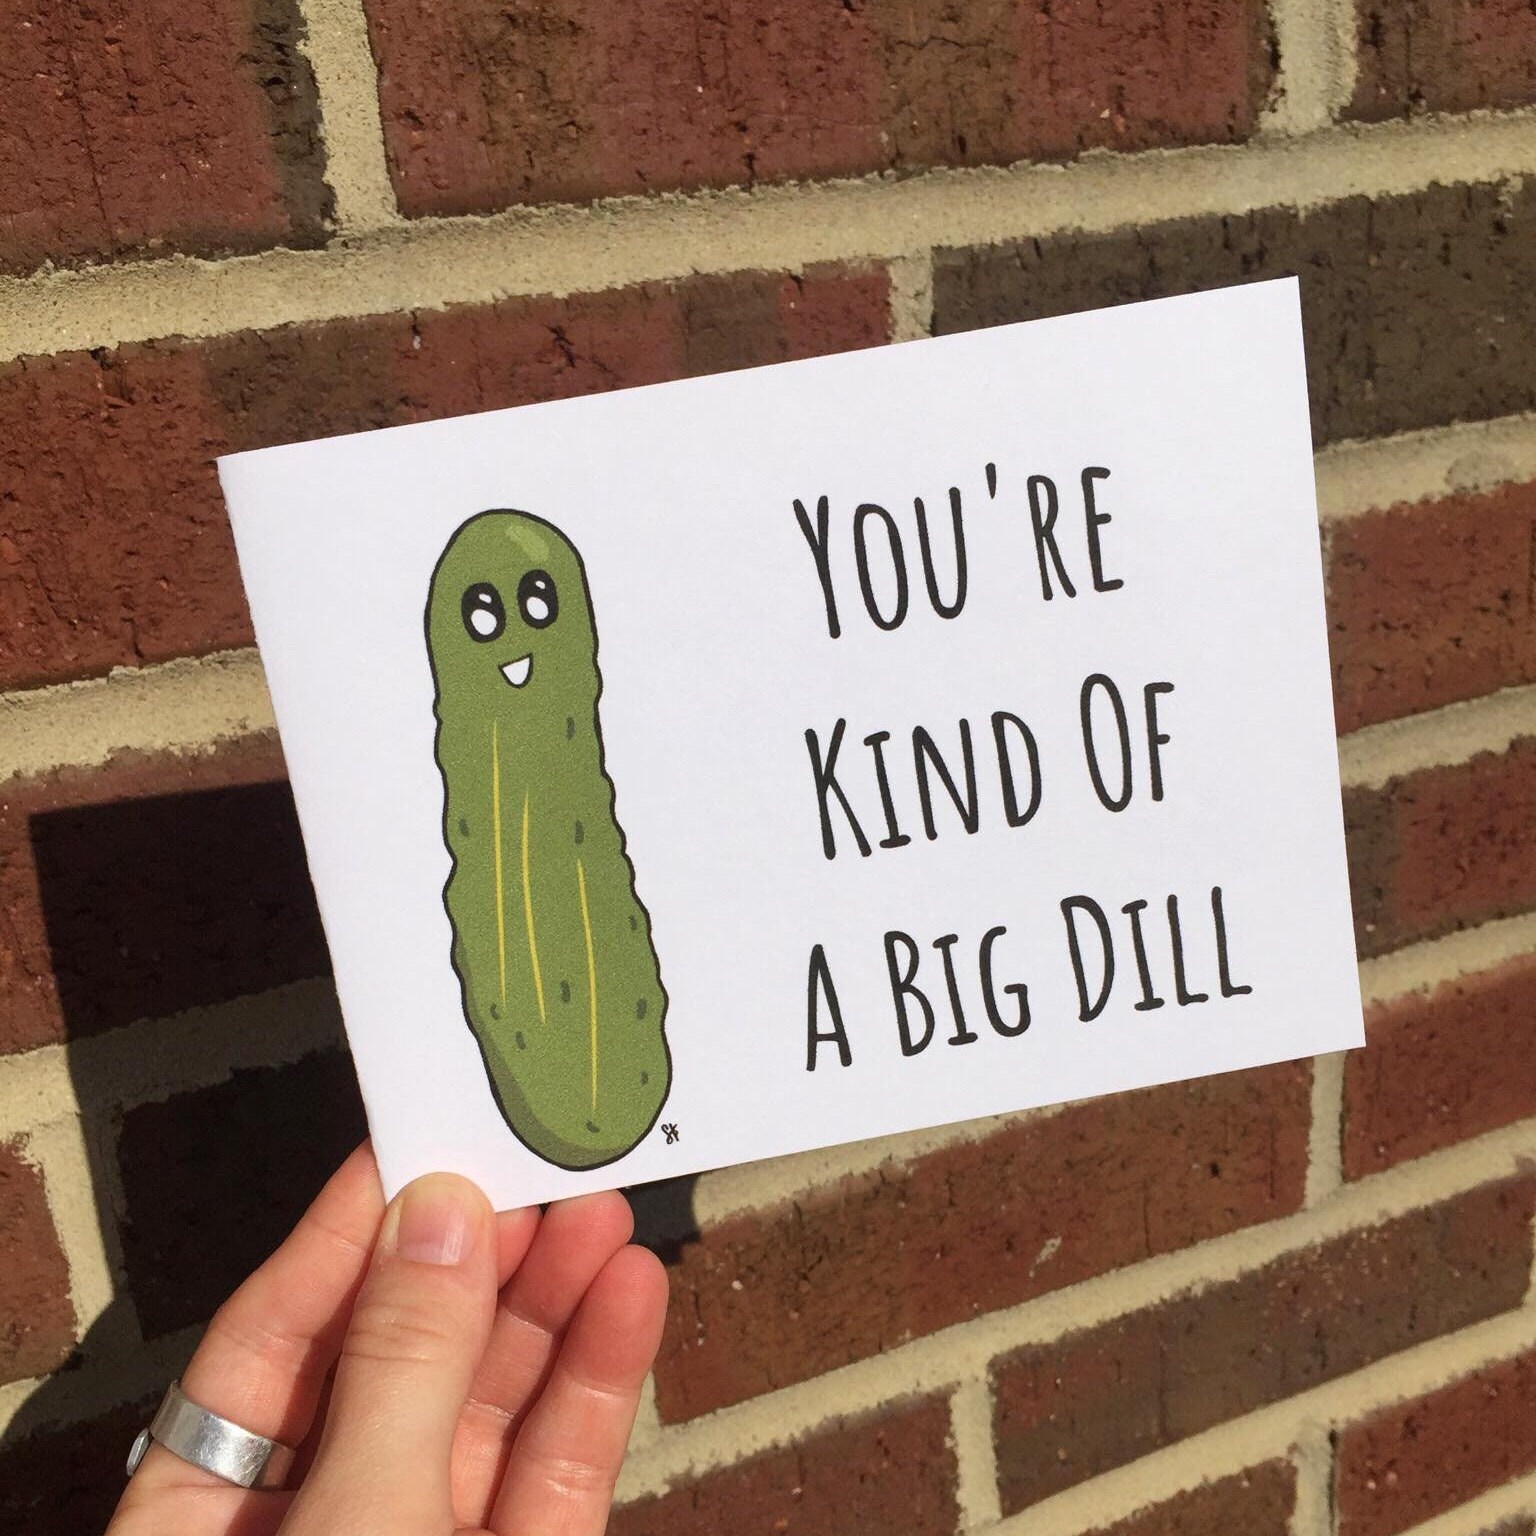 Puns - I'm Kind of a Big Dill Throw Pillow by The Lady Derp